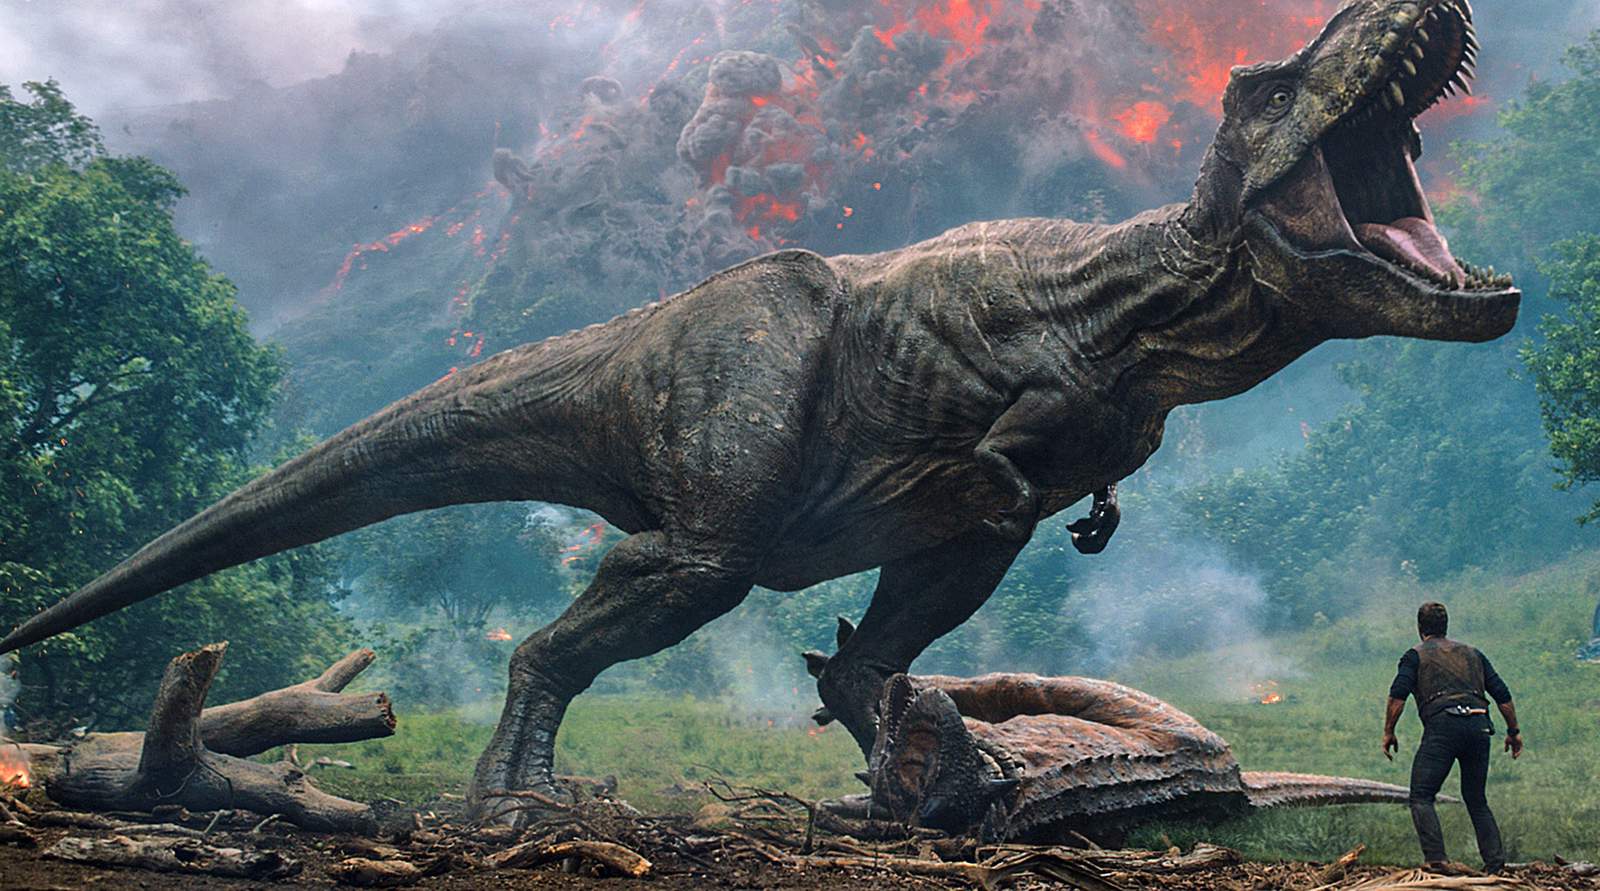 ‘Jurassic World’ shoot suspended after COVID-19 positives